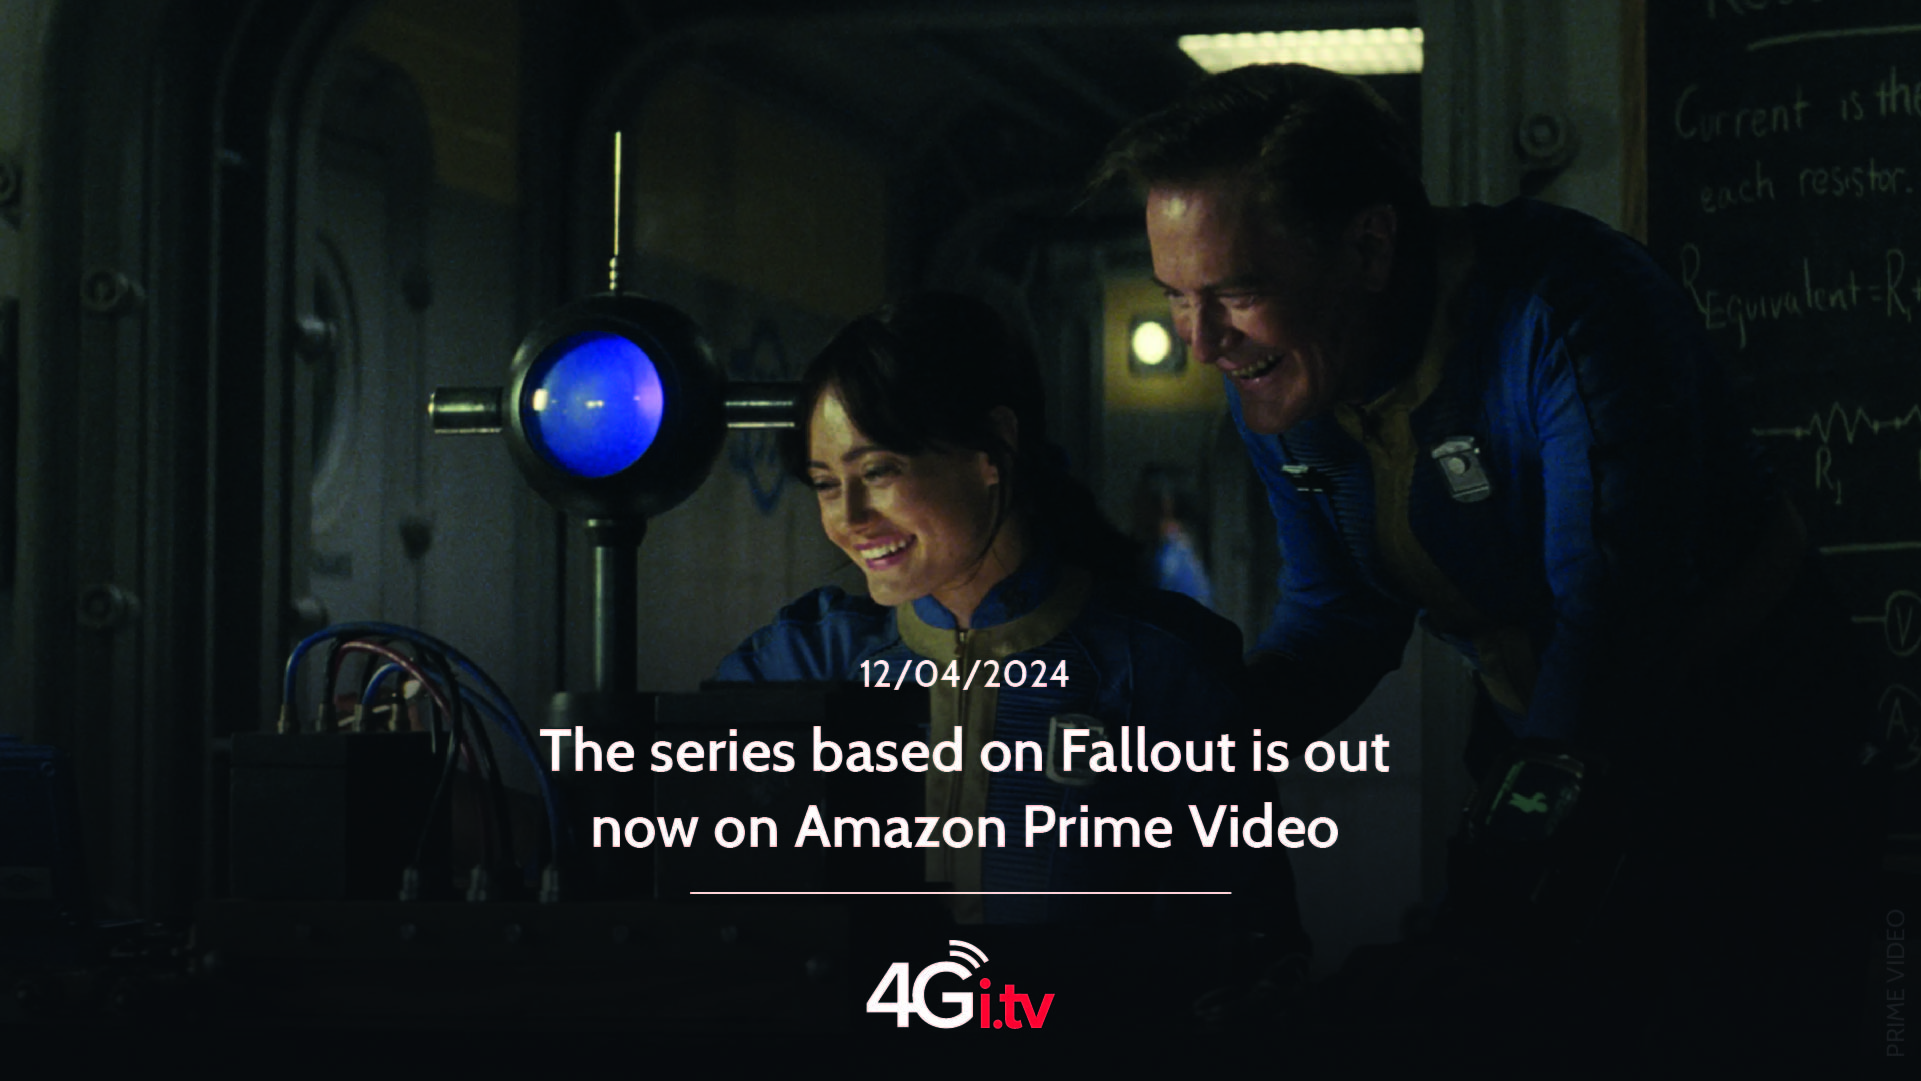 Lesen Sie mehr über den Artikel The series based on Fallout is out now on Amazon Prime Video